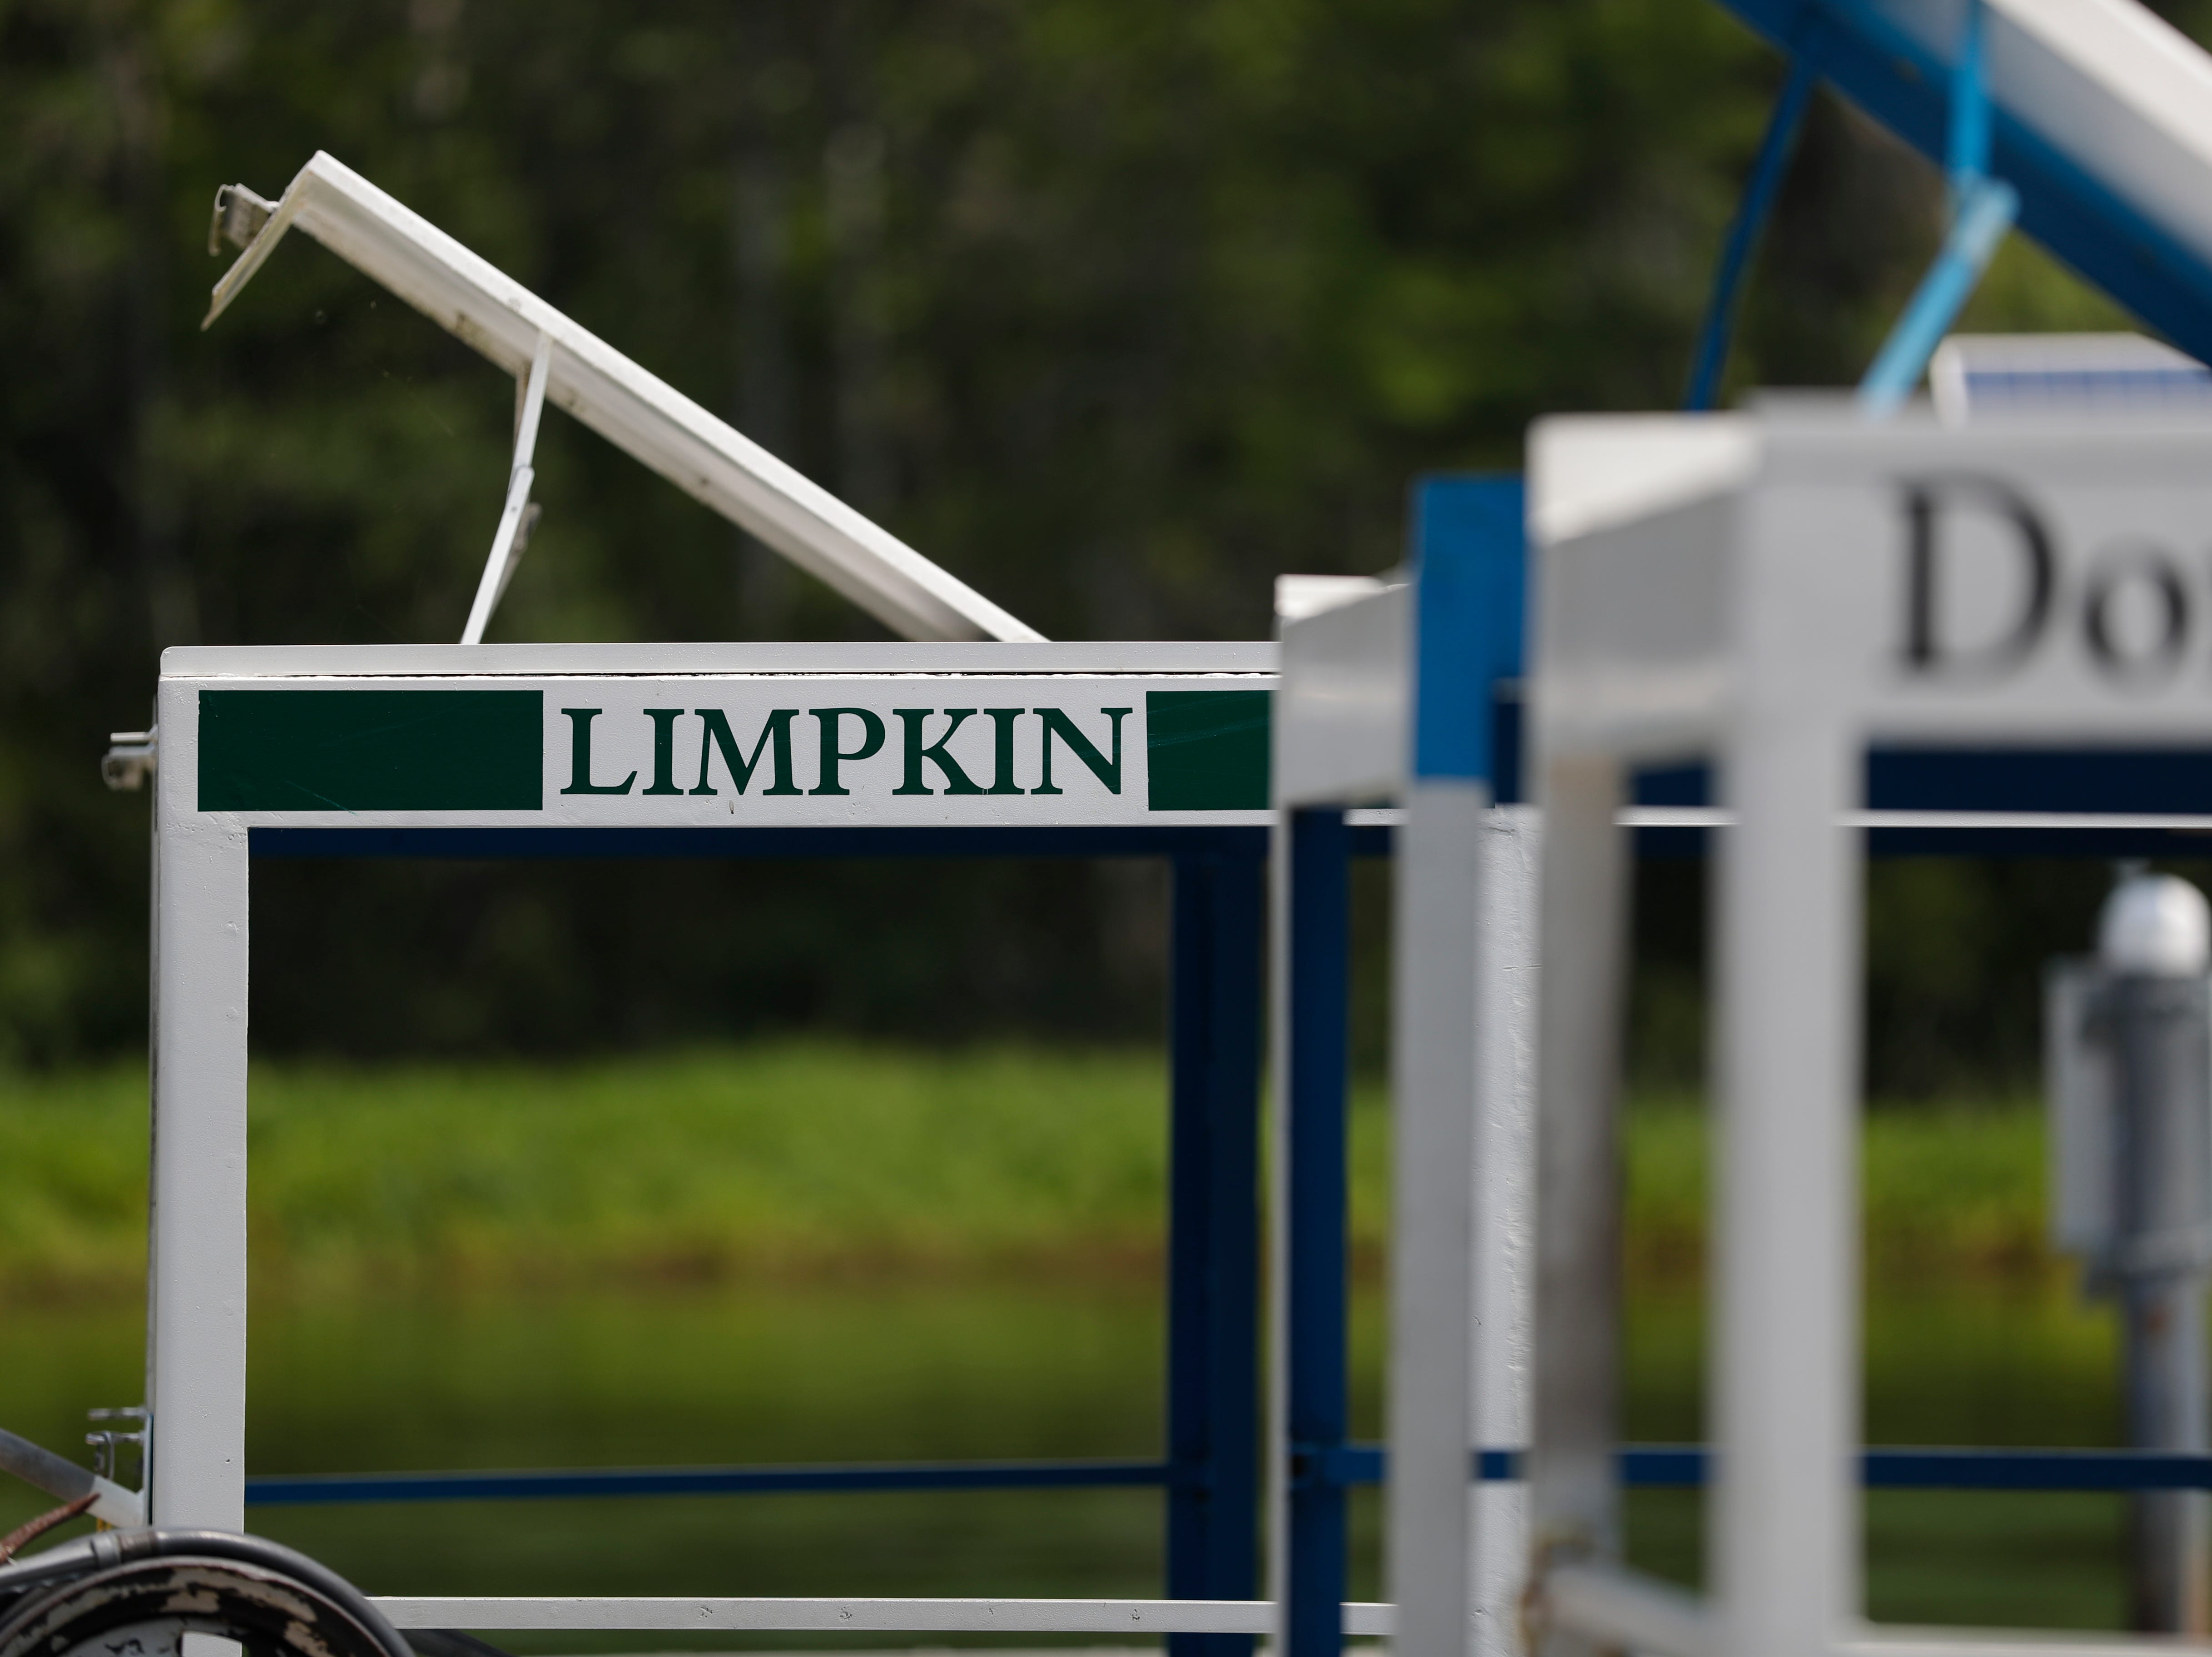 One of the Wakulla Springs tour boats is named "Limpkin," after the bird that served as the park's mascot for many years before it no longer inhabited the park. Now, at least one is back after the return of the apple snail, the limpkin's main source of food.